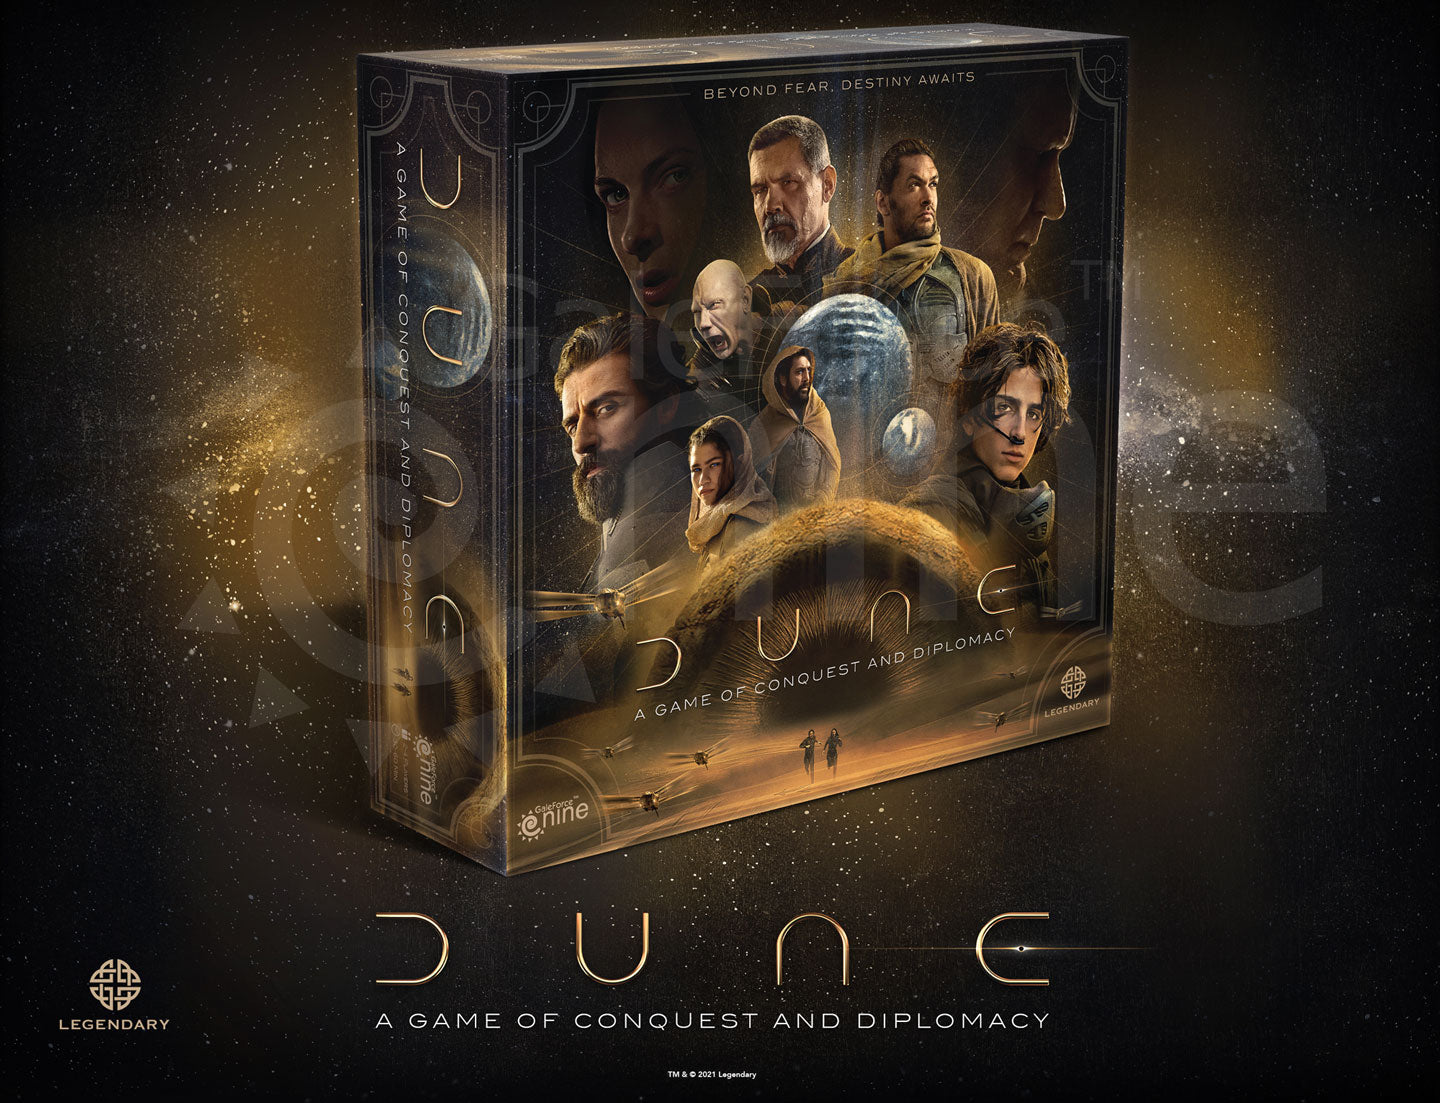 DUNE: A Game of Conquest & Diplomacy (Film Version)